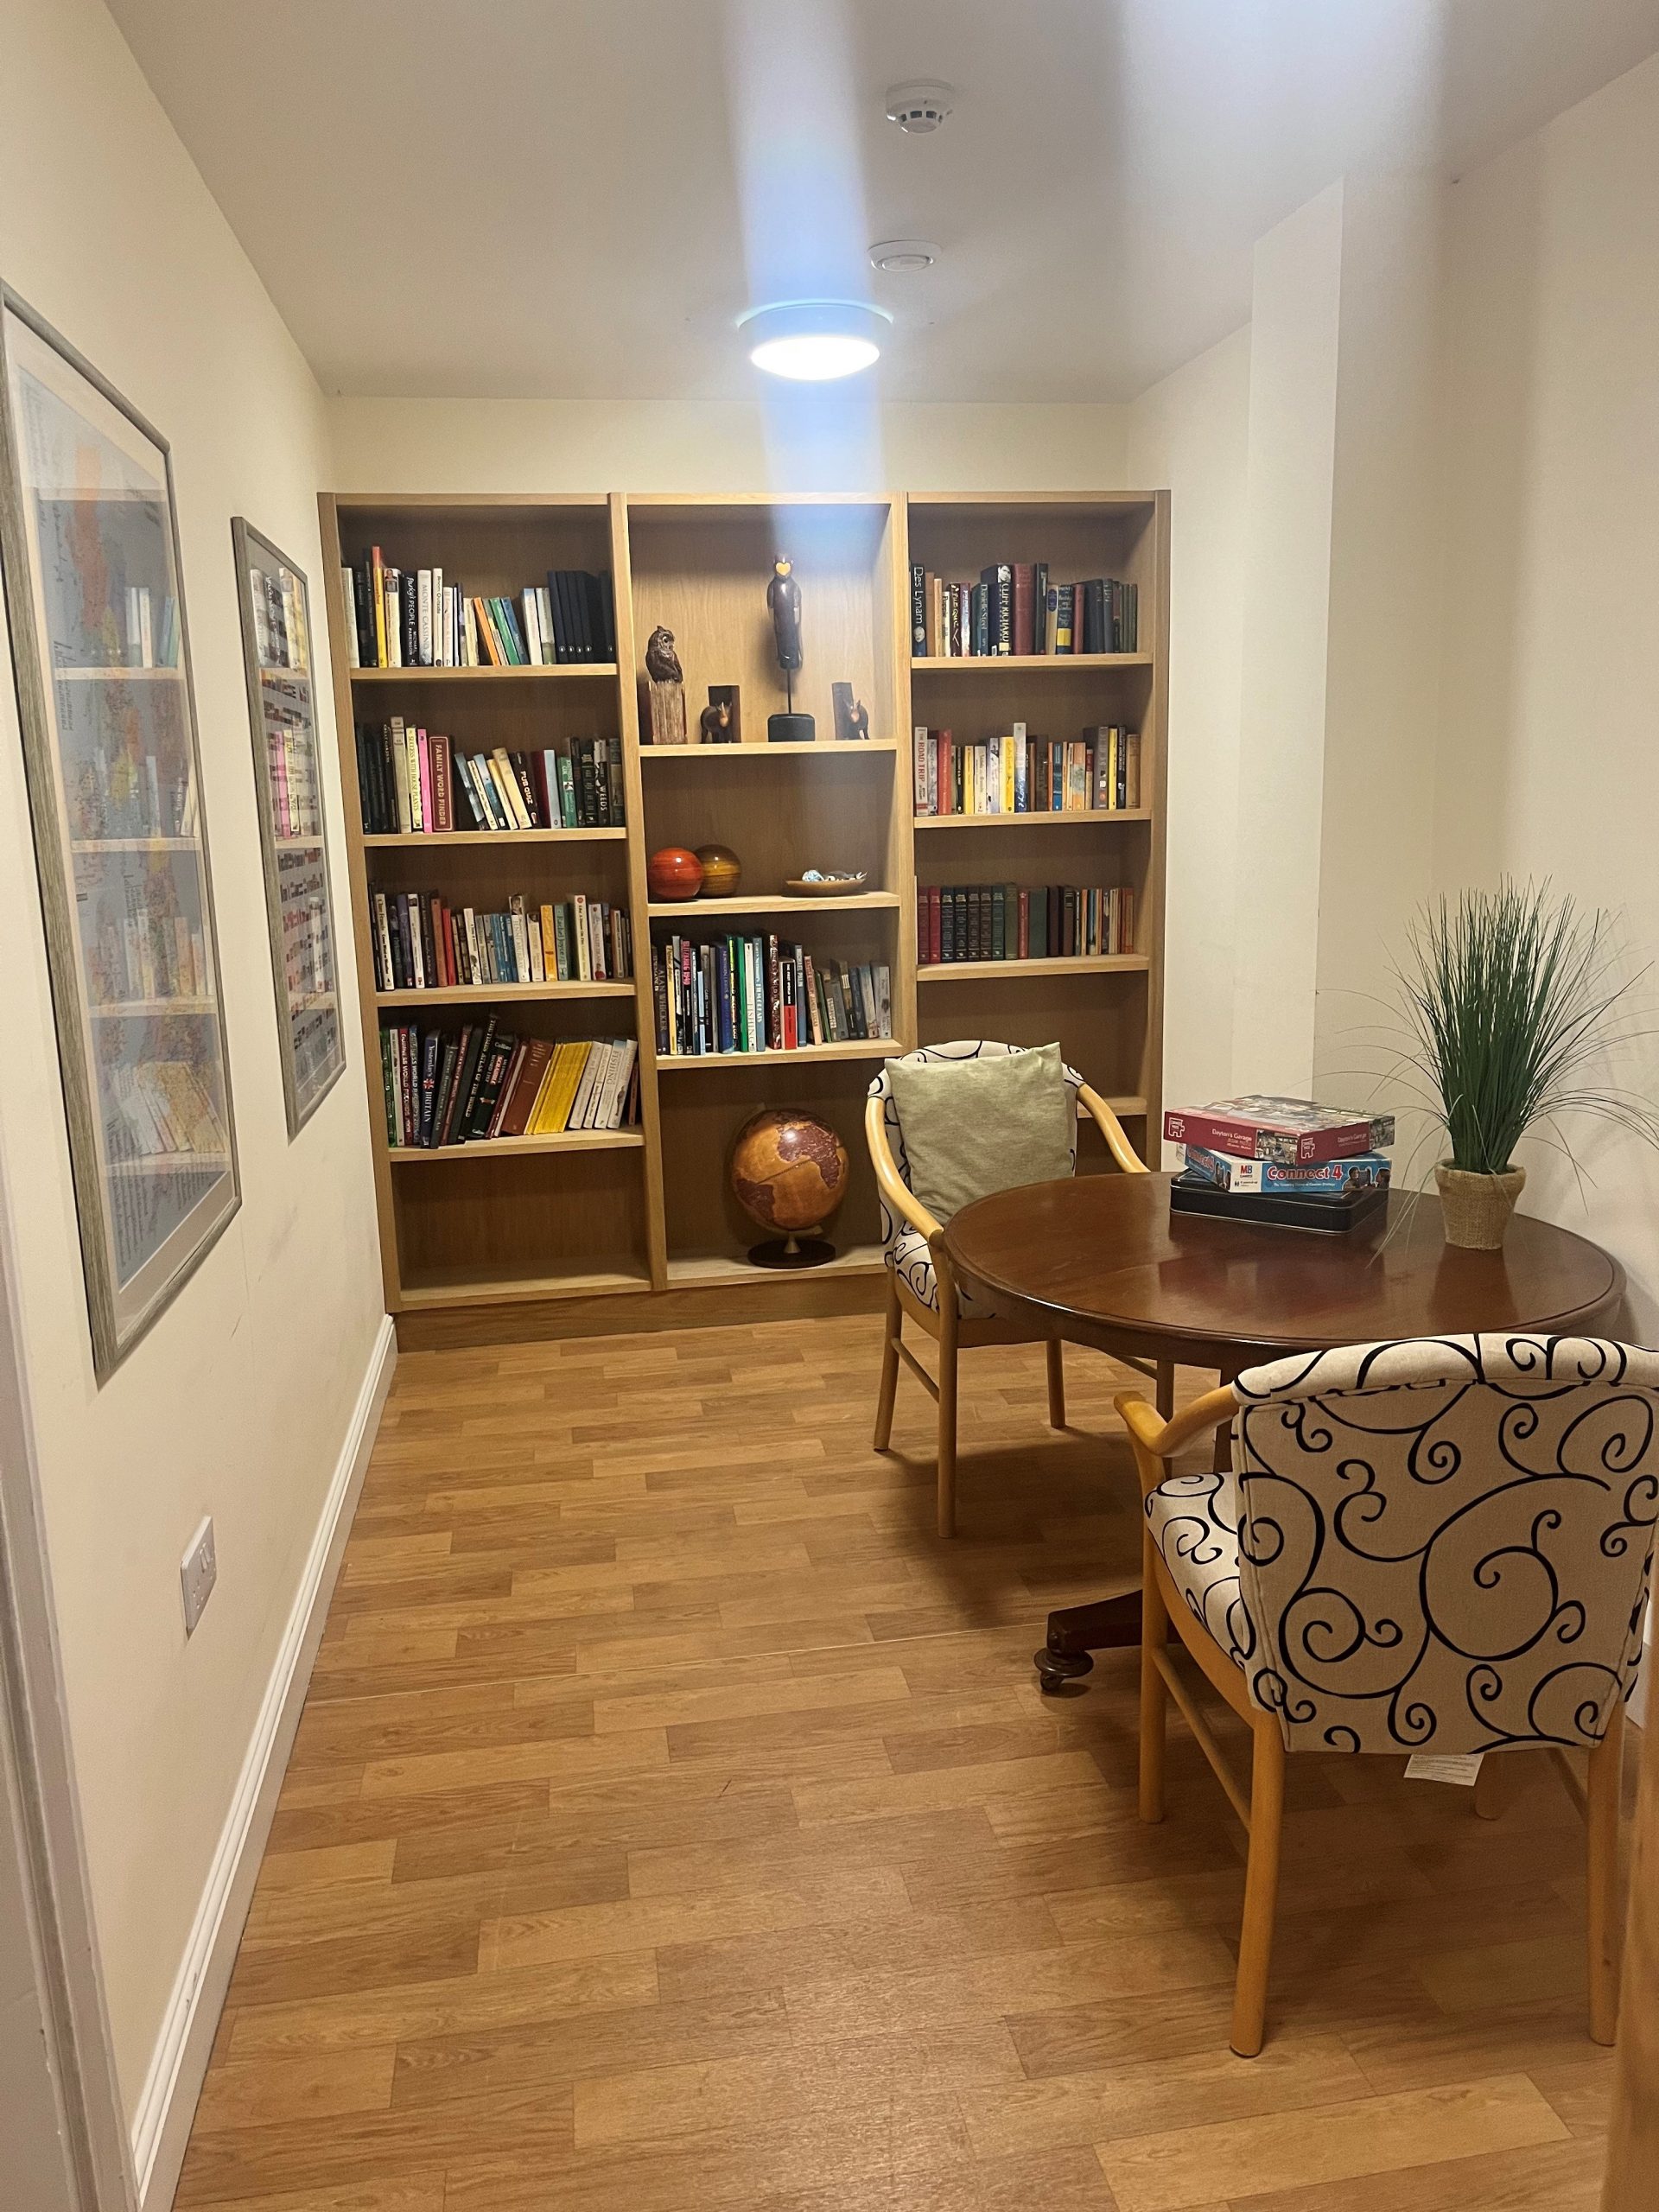 Our refurbished library seating area at Oakdene Care Home